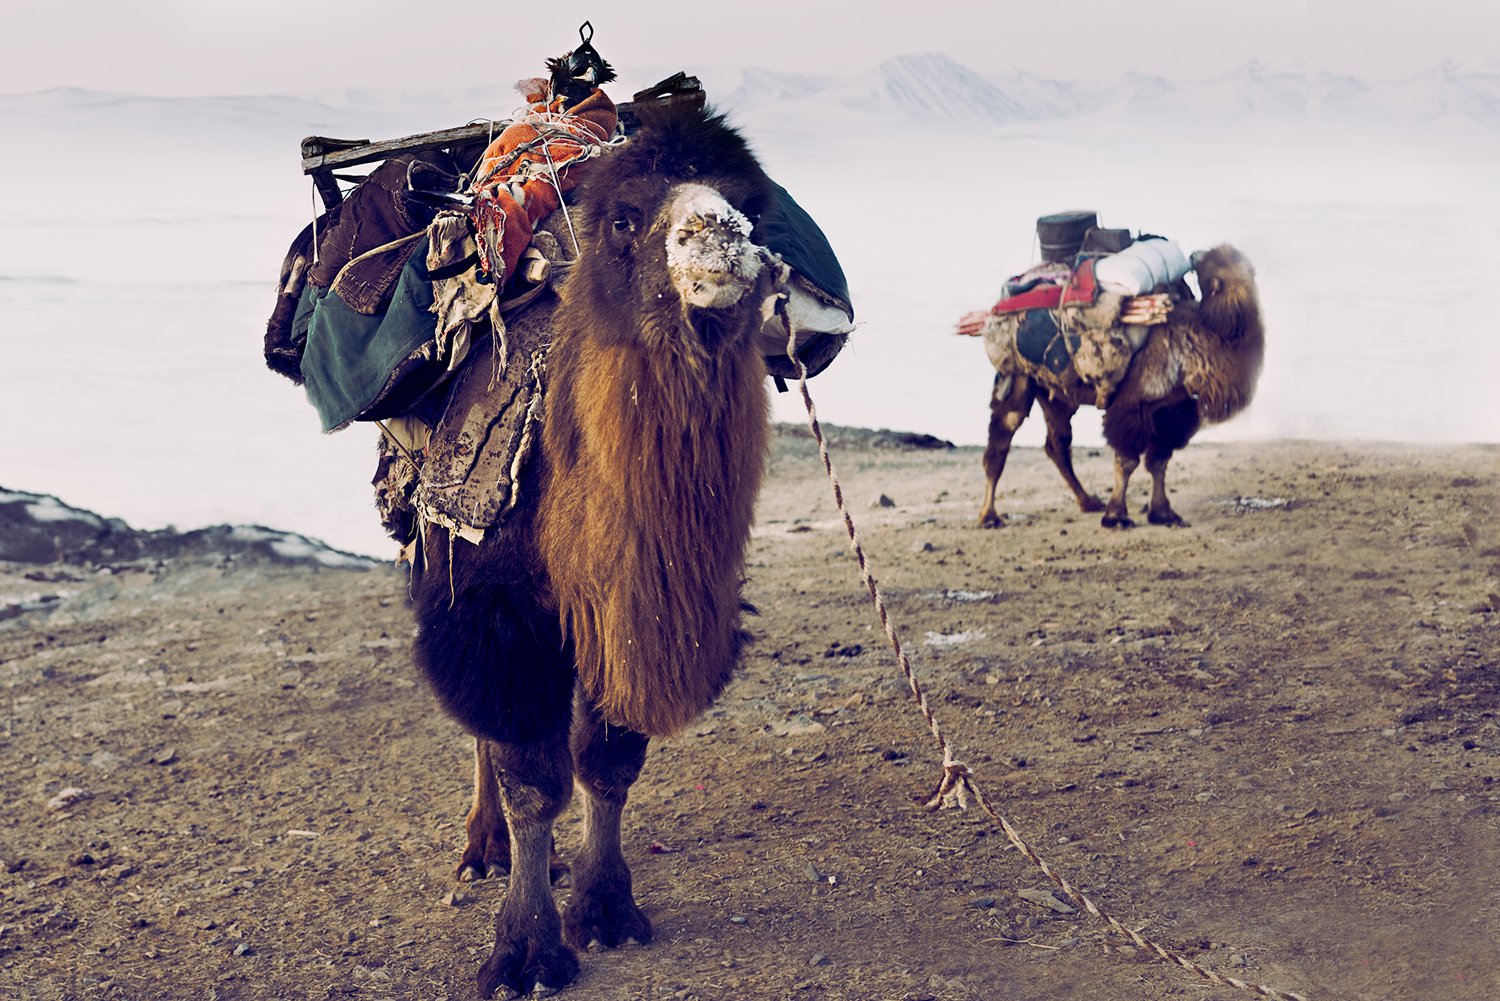 The bactrian camels are used to carry the nomads ger and other household equipment. They are also an important backup when yaks, goats and sheep are too exhausted to continue. This camel is transporting the eagle, famously used by the Kazakhs to hunt fox and wolves.